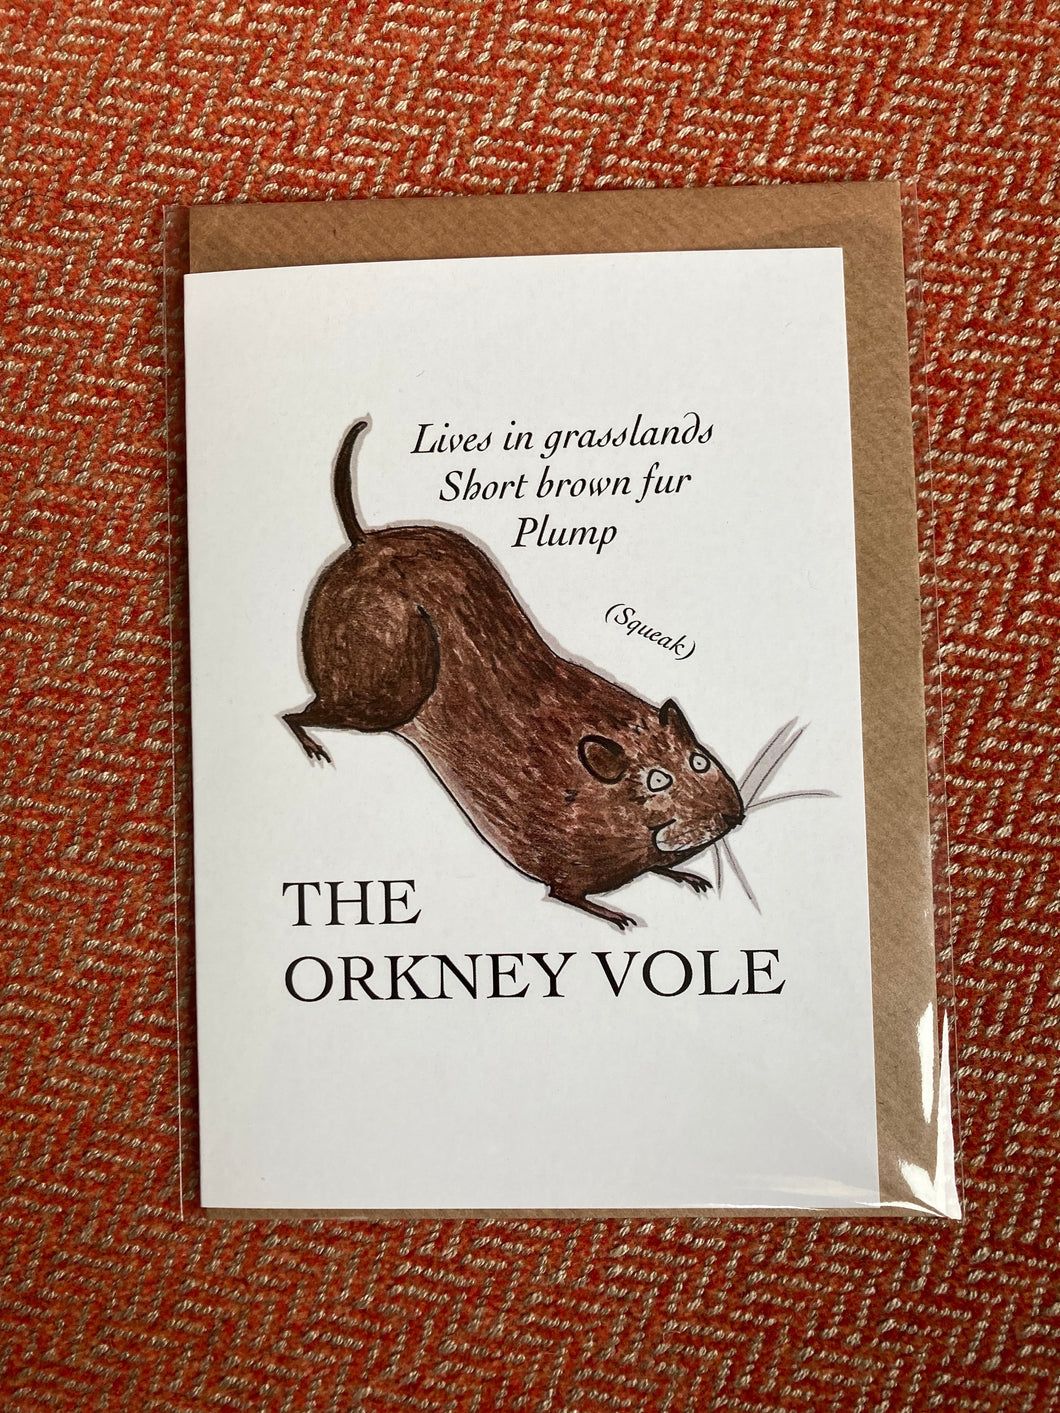 The Orkney Vole, A6 sized card, illustrated by Britt Harcus for the Stromness Museum.  Blank inside for your own message or note. Enjoy!